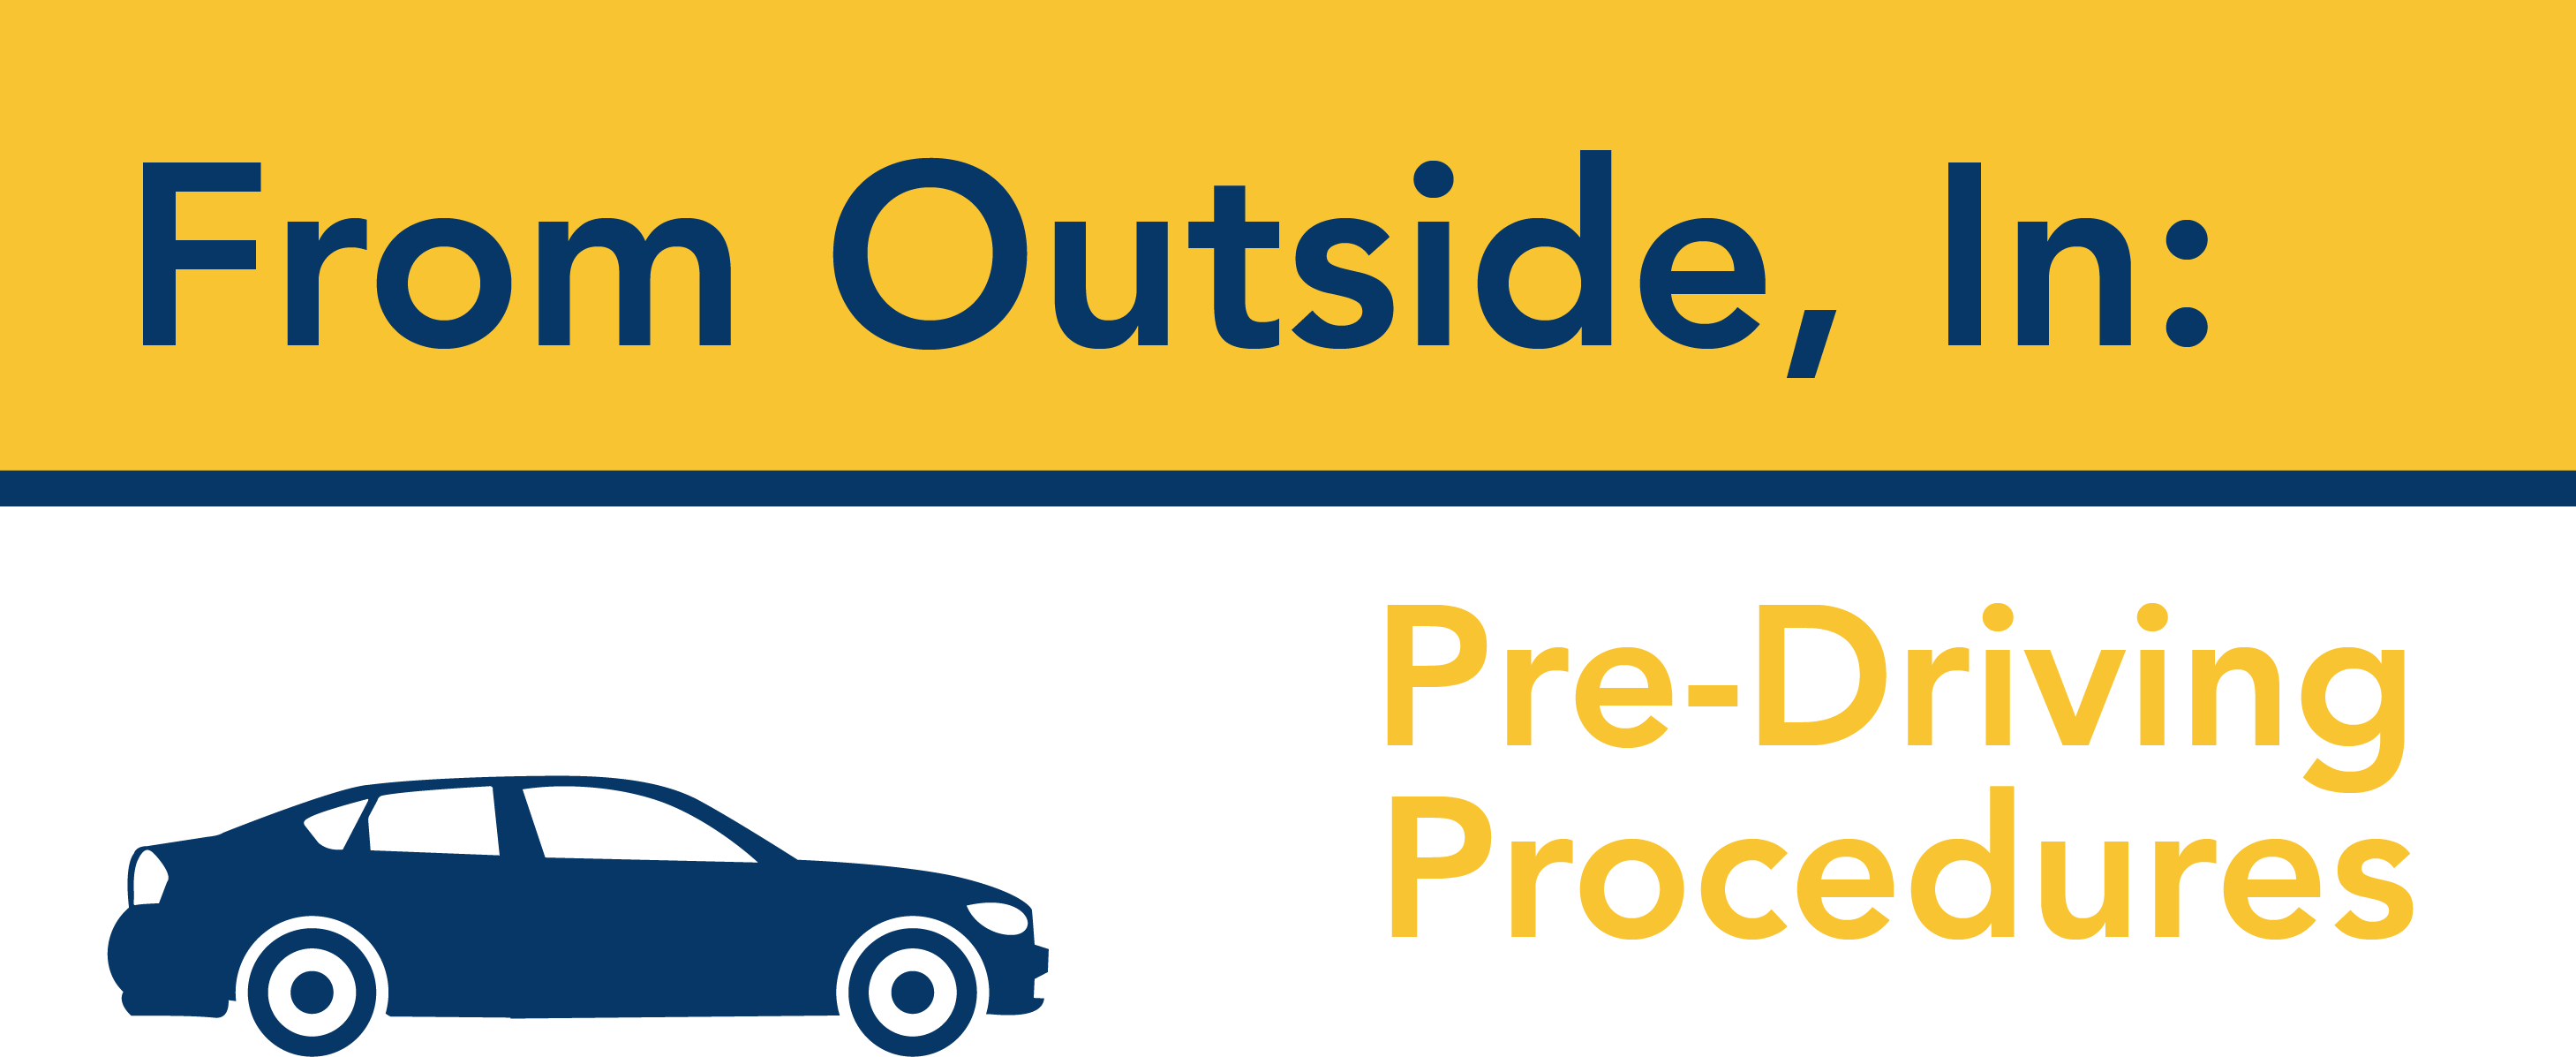 From Outside, In: Pre-Driving Procedures *with car graphic*